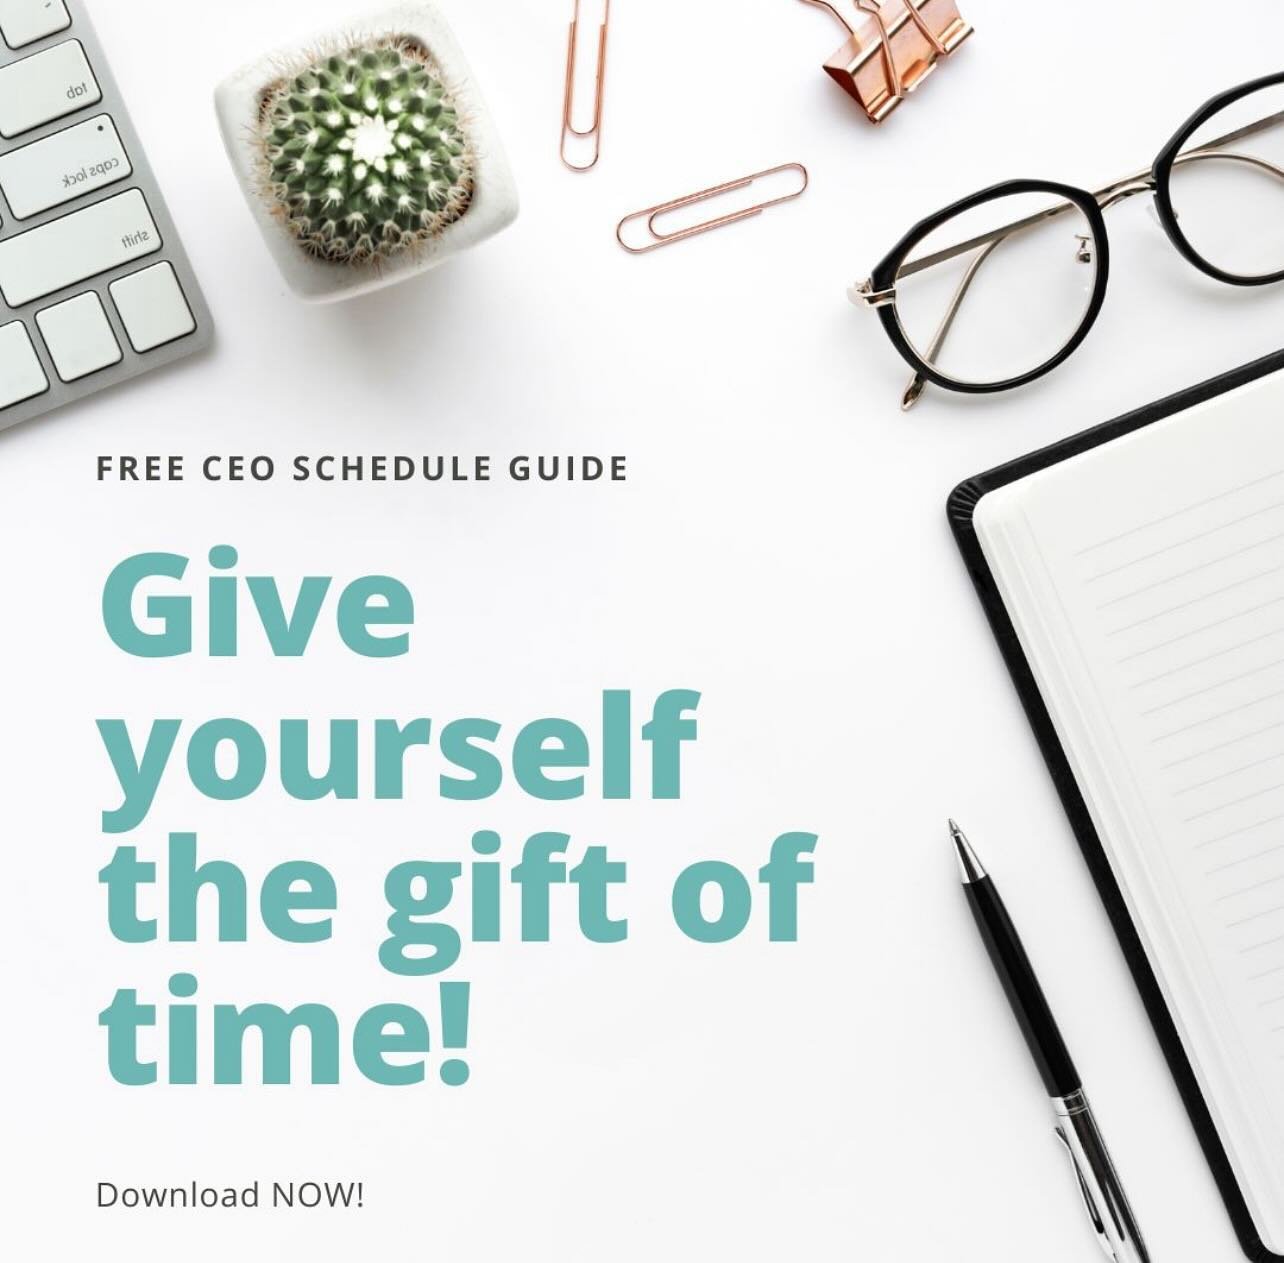 Double tap for a FREE gift! 

The gift of time, or as I like to think of it... the best gift we can all really give to ourselves. 

With my FREE CEO Schedule guide, give yourself the gift of an hour or more back into your busy day by designing your i